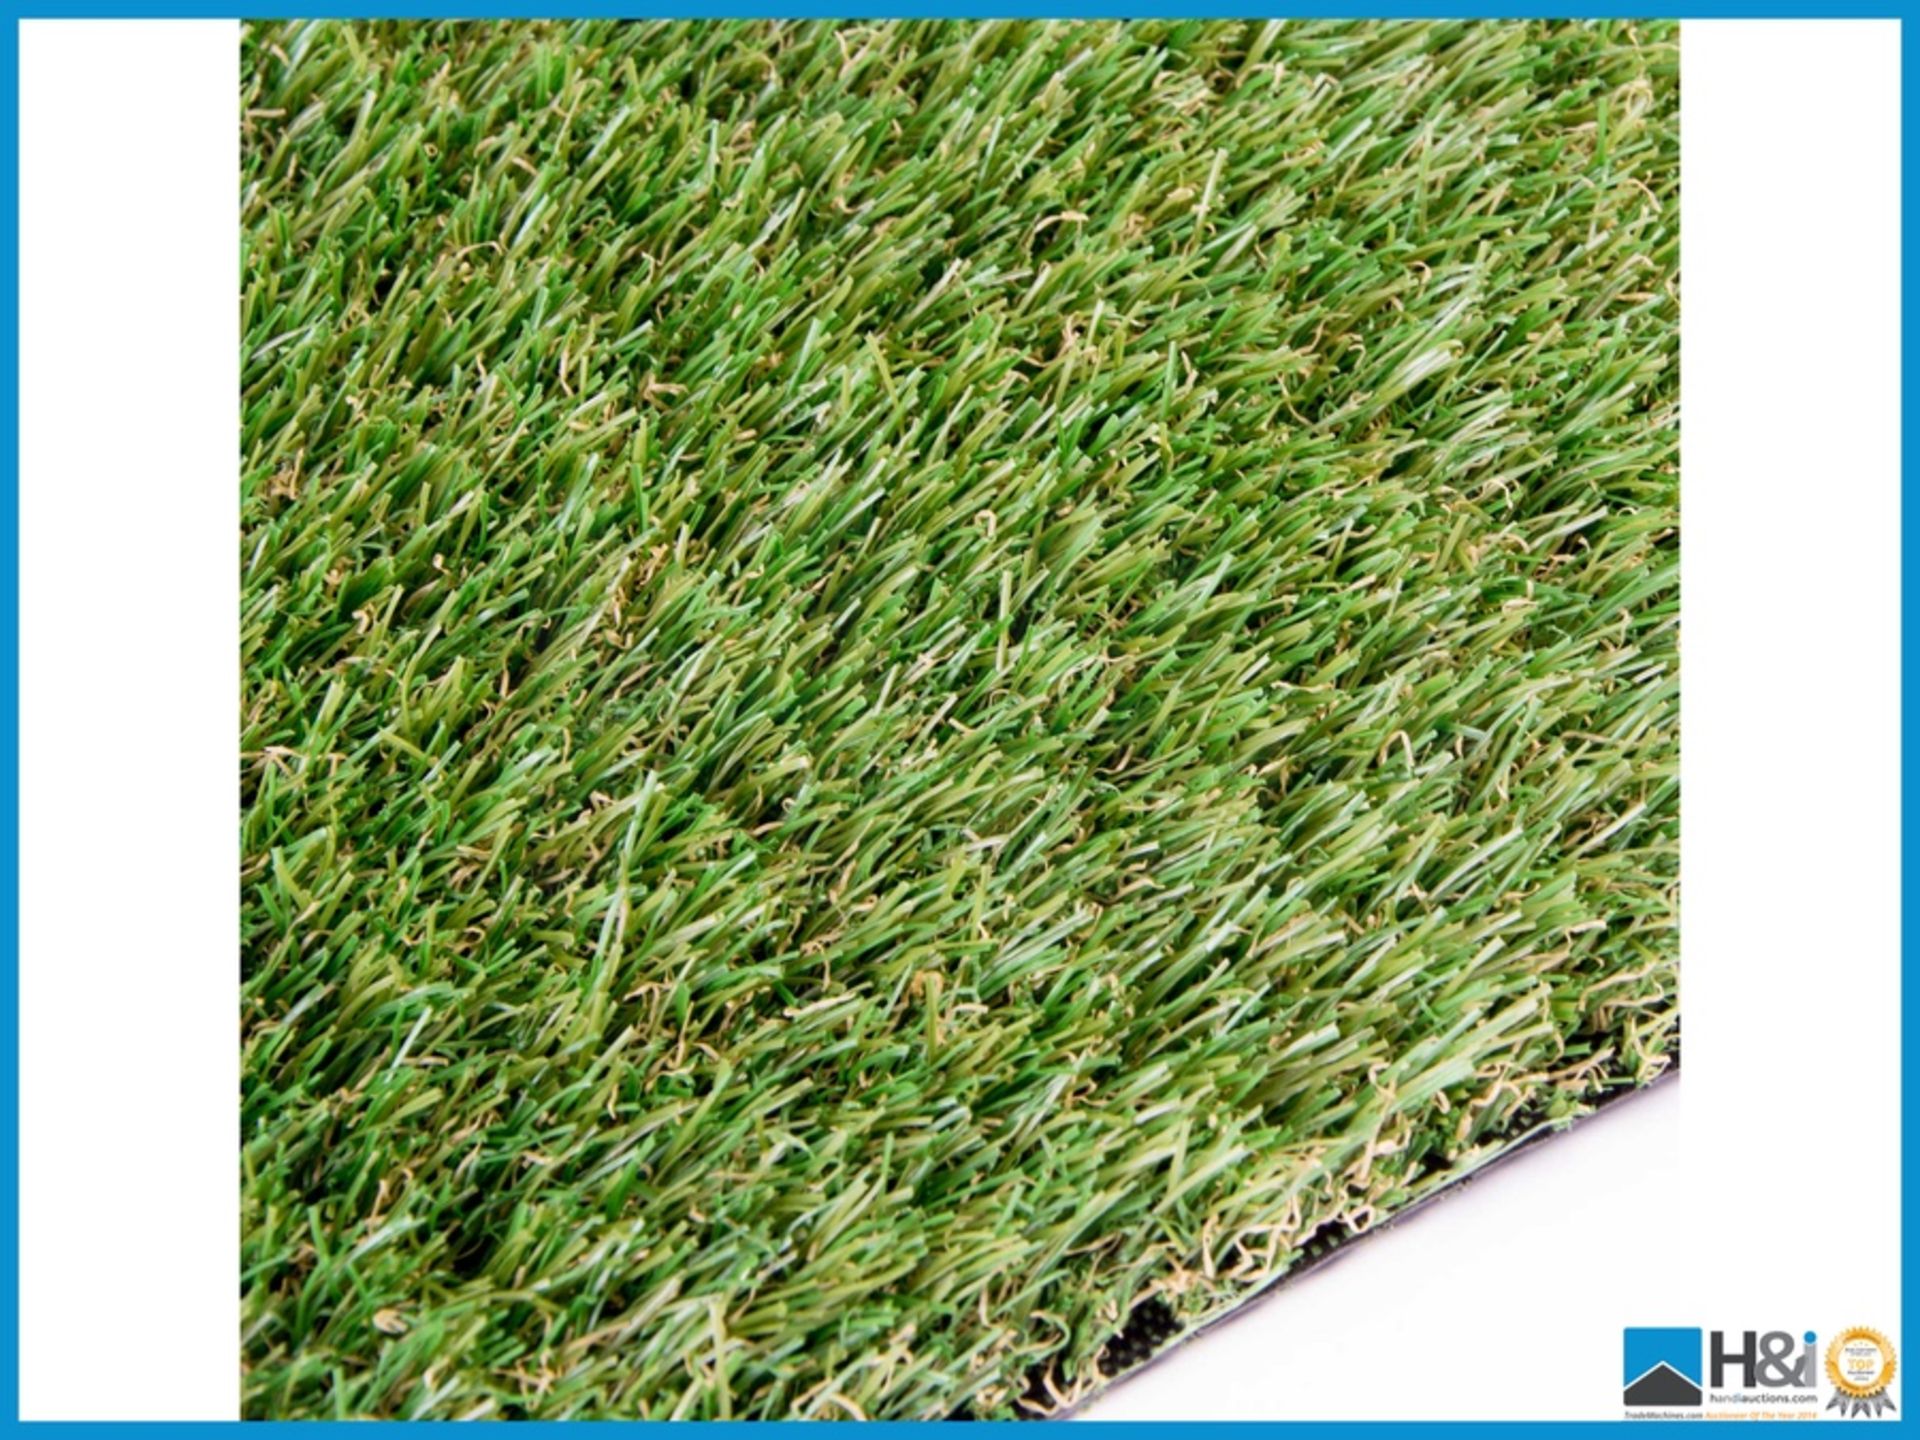 Ultra high-quality 'Woodthorpe' artificial grass. Useage applications, commercial and domestic,